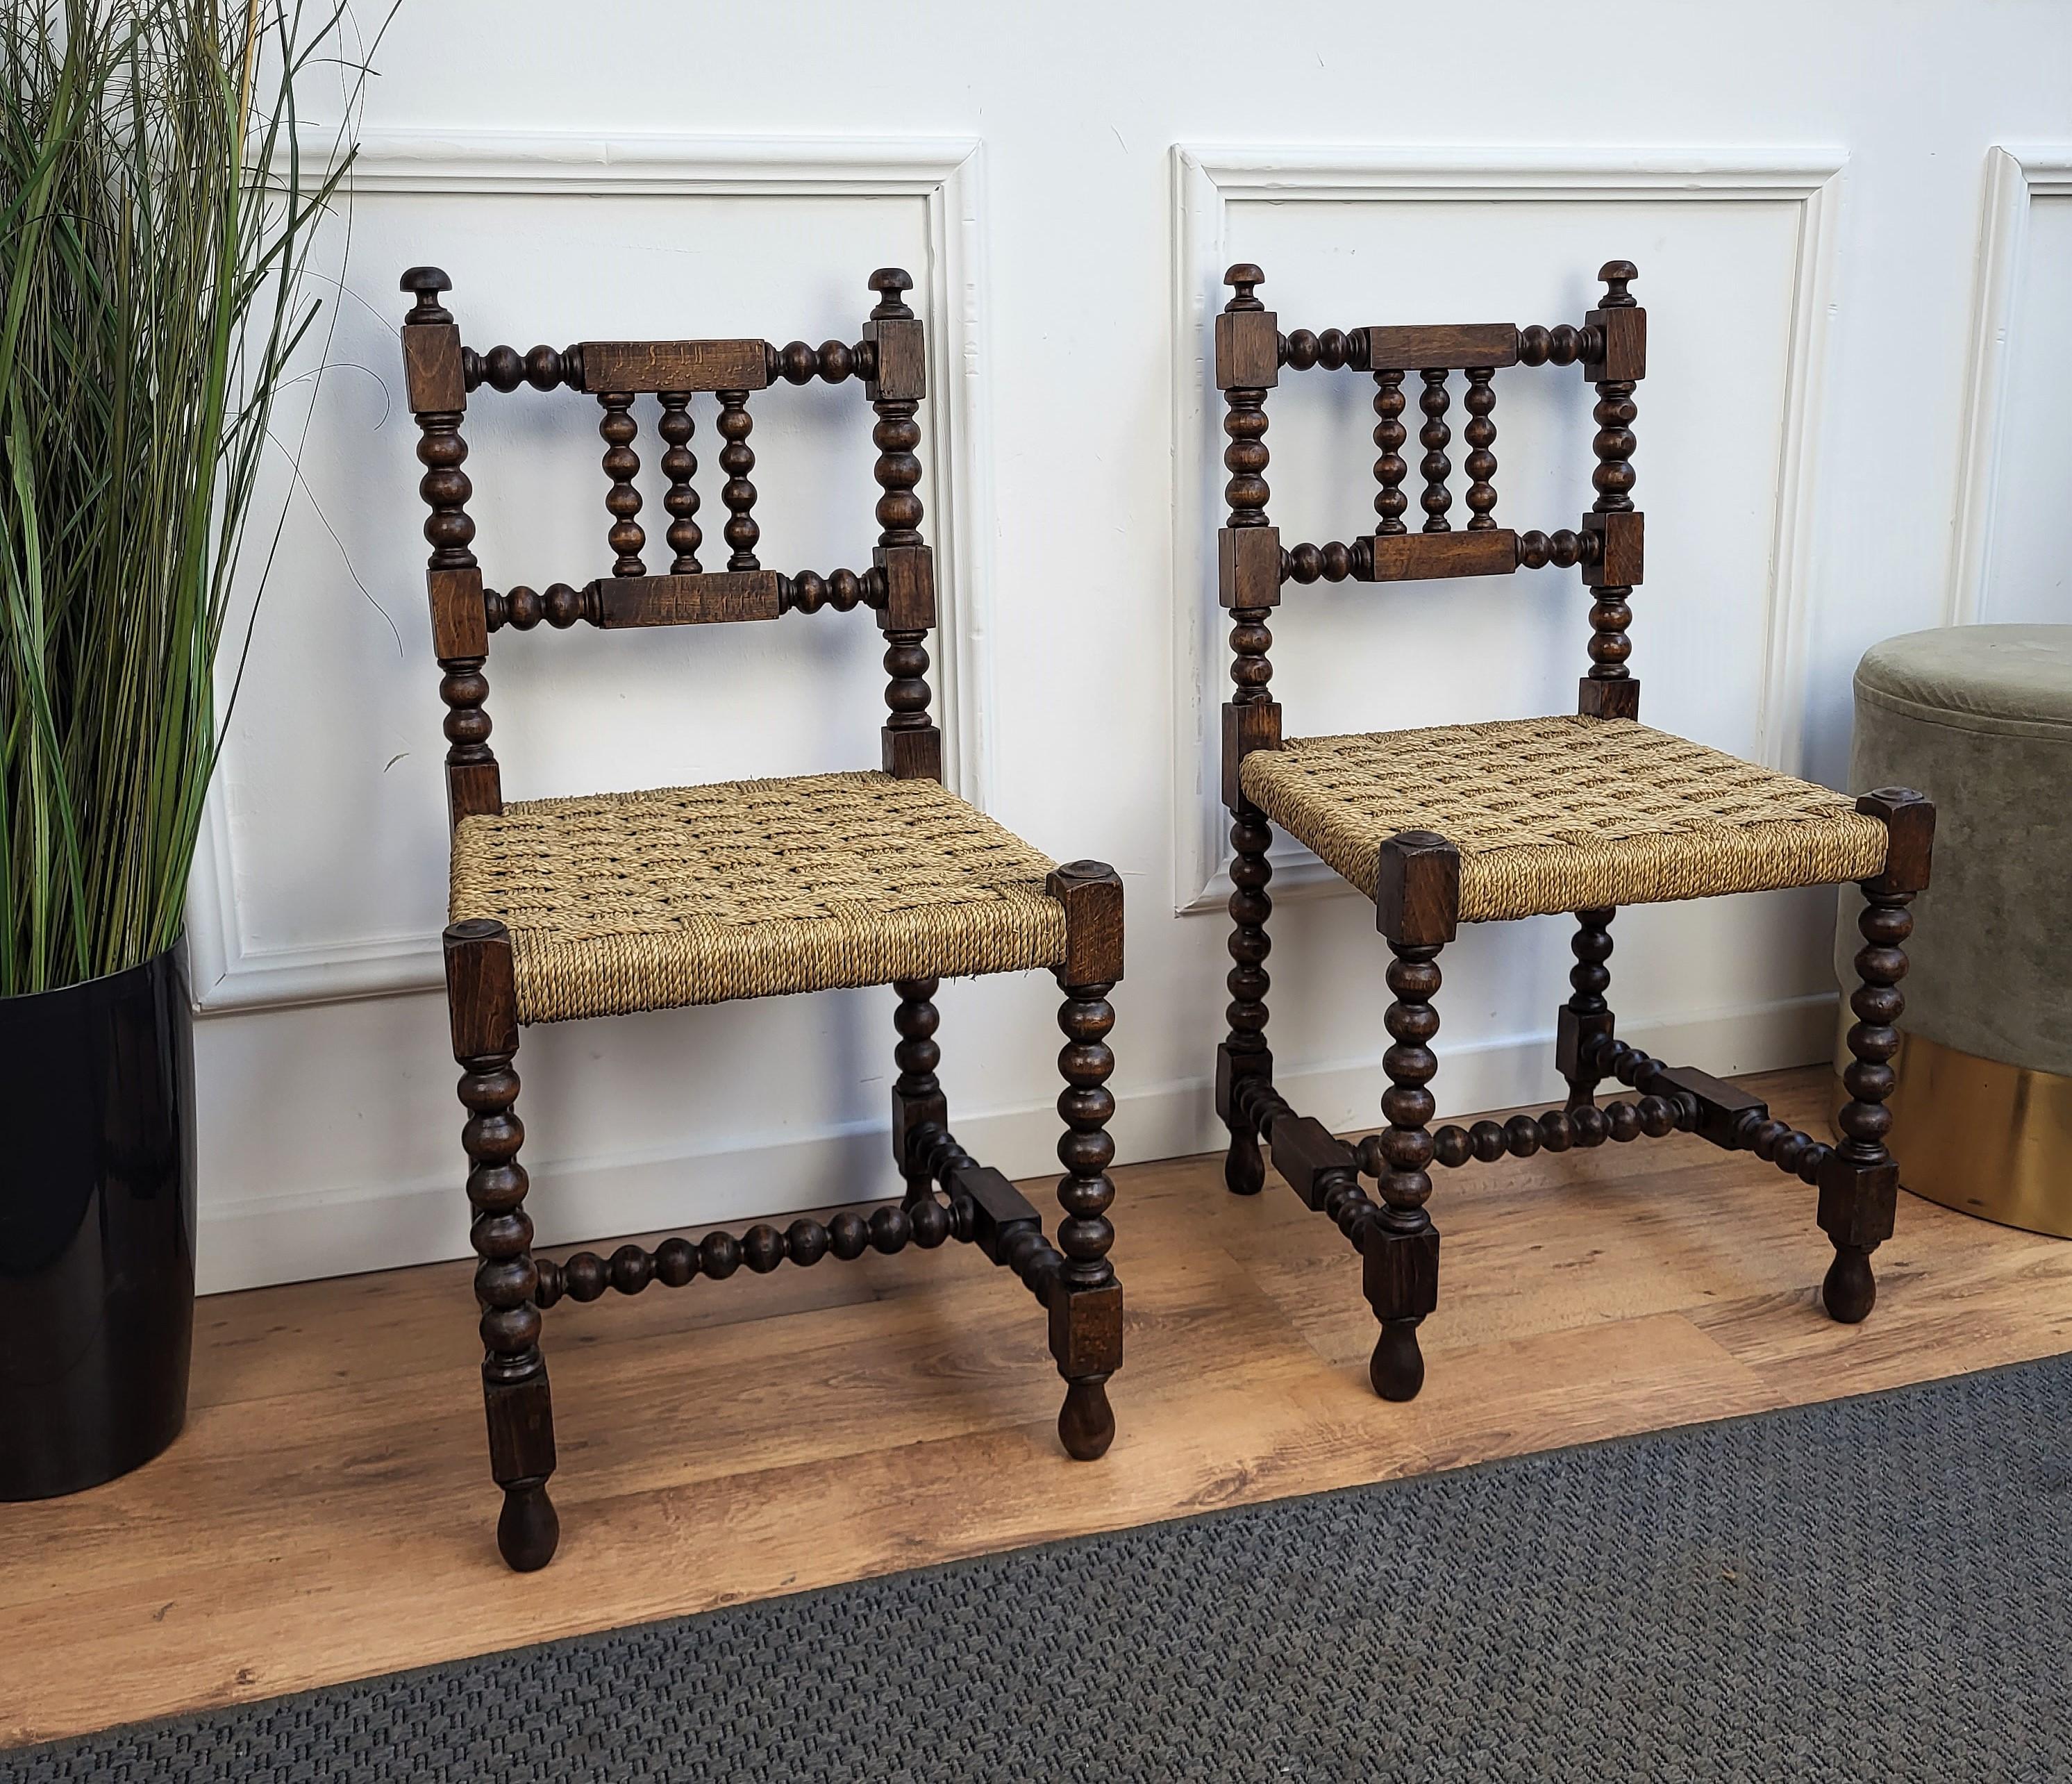 Stylish pair of 1960s Mid-Century Modern chairs or stools in wood and cord or woven rope. Beautifully bobbin turned barley twisted, stick and stone, legs and back, connected to one another with bottom central stretcher. The traditional and classical